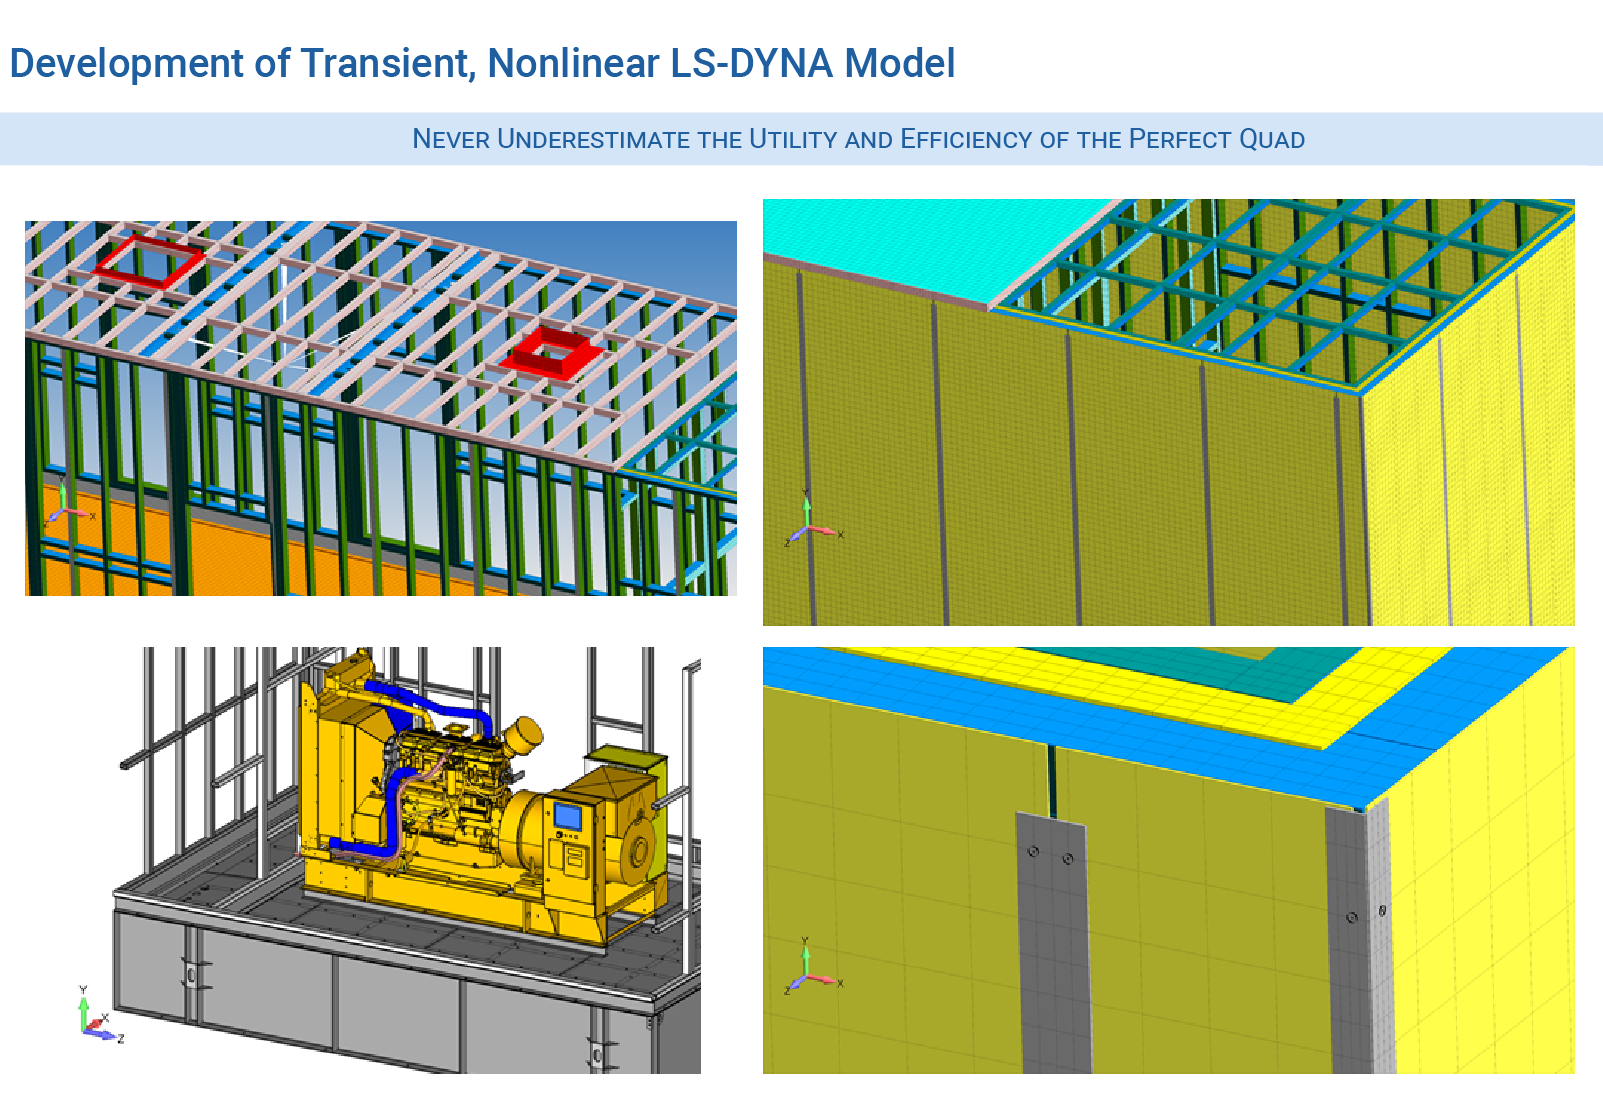 Transient nonlinear LS-DYNA model development for blast analysis of building